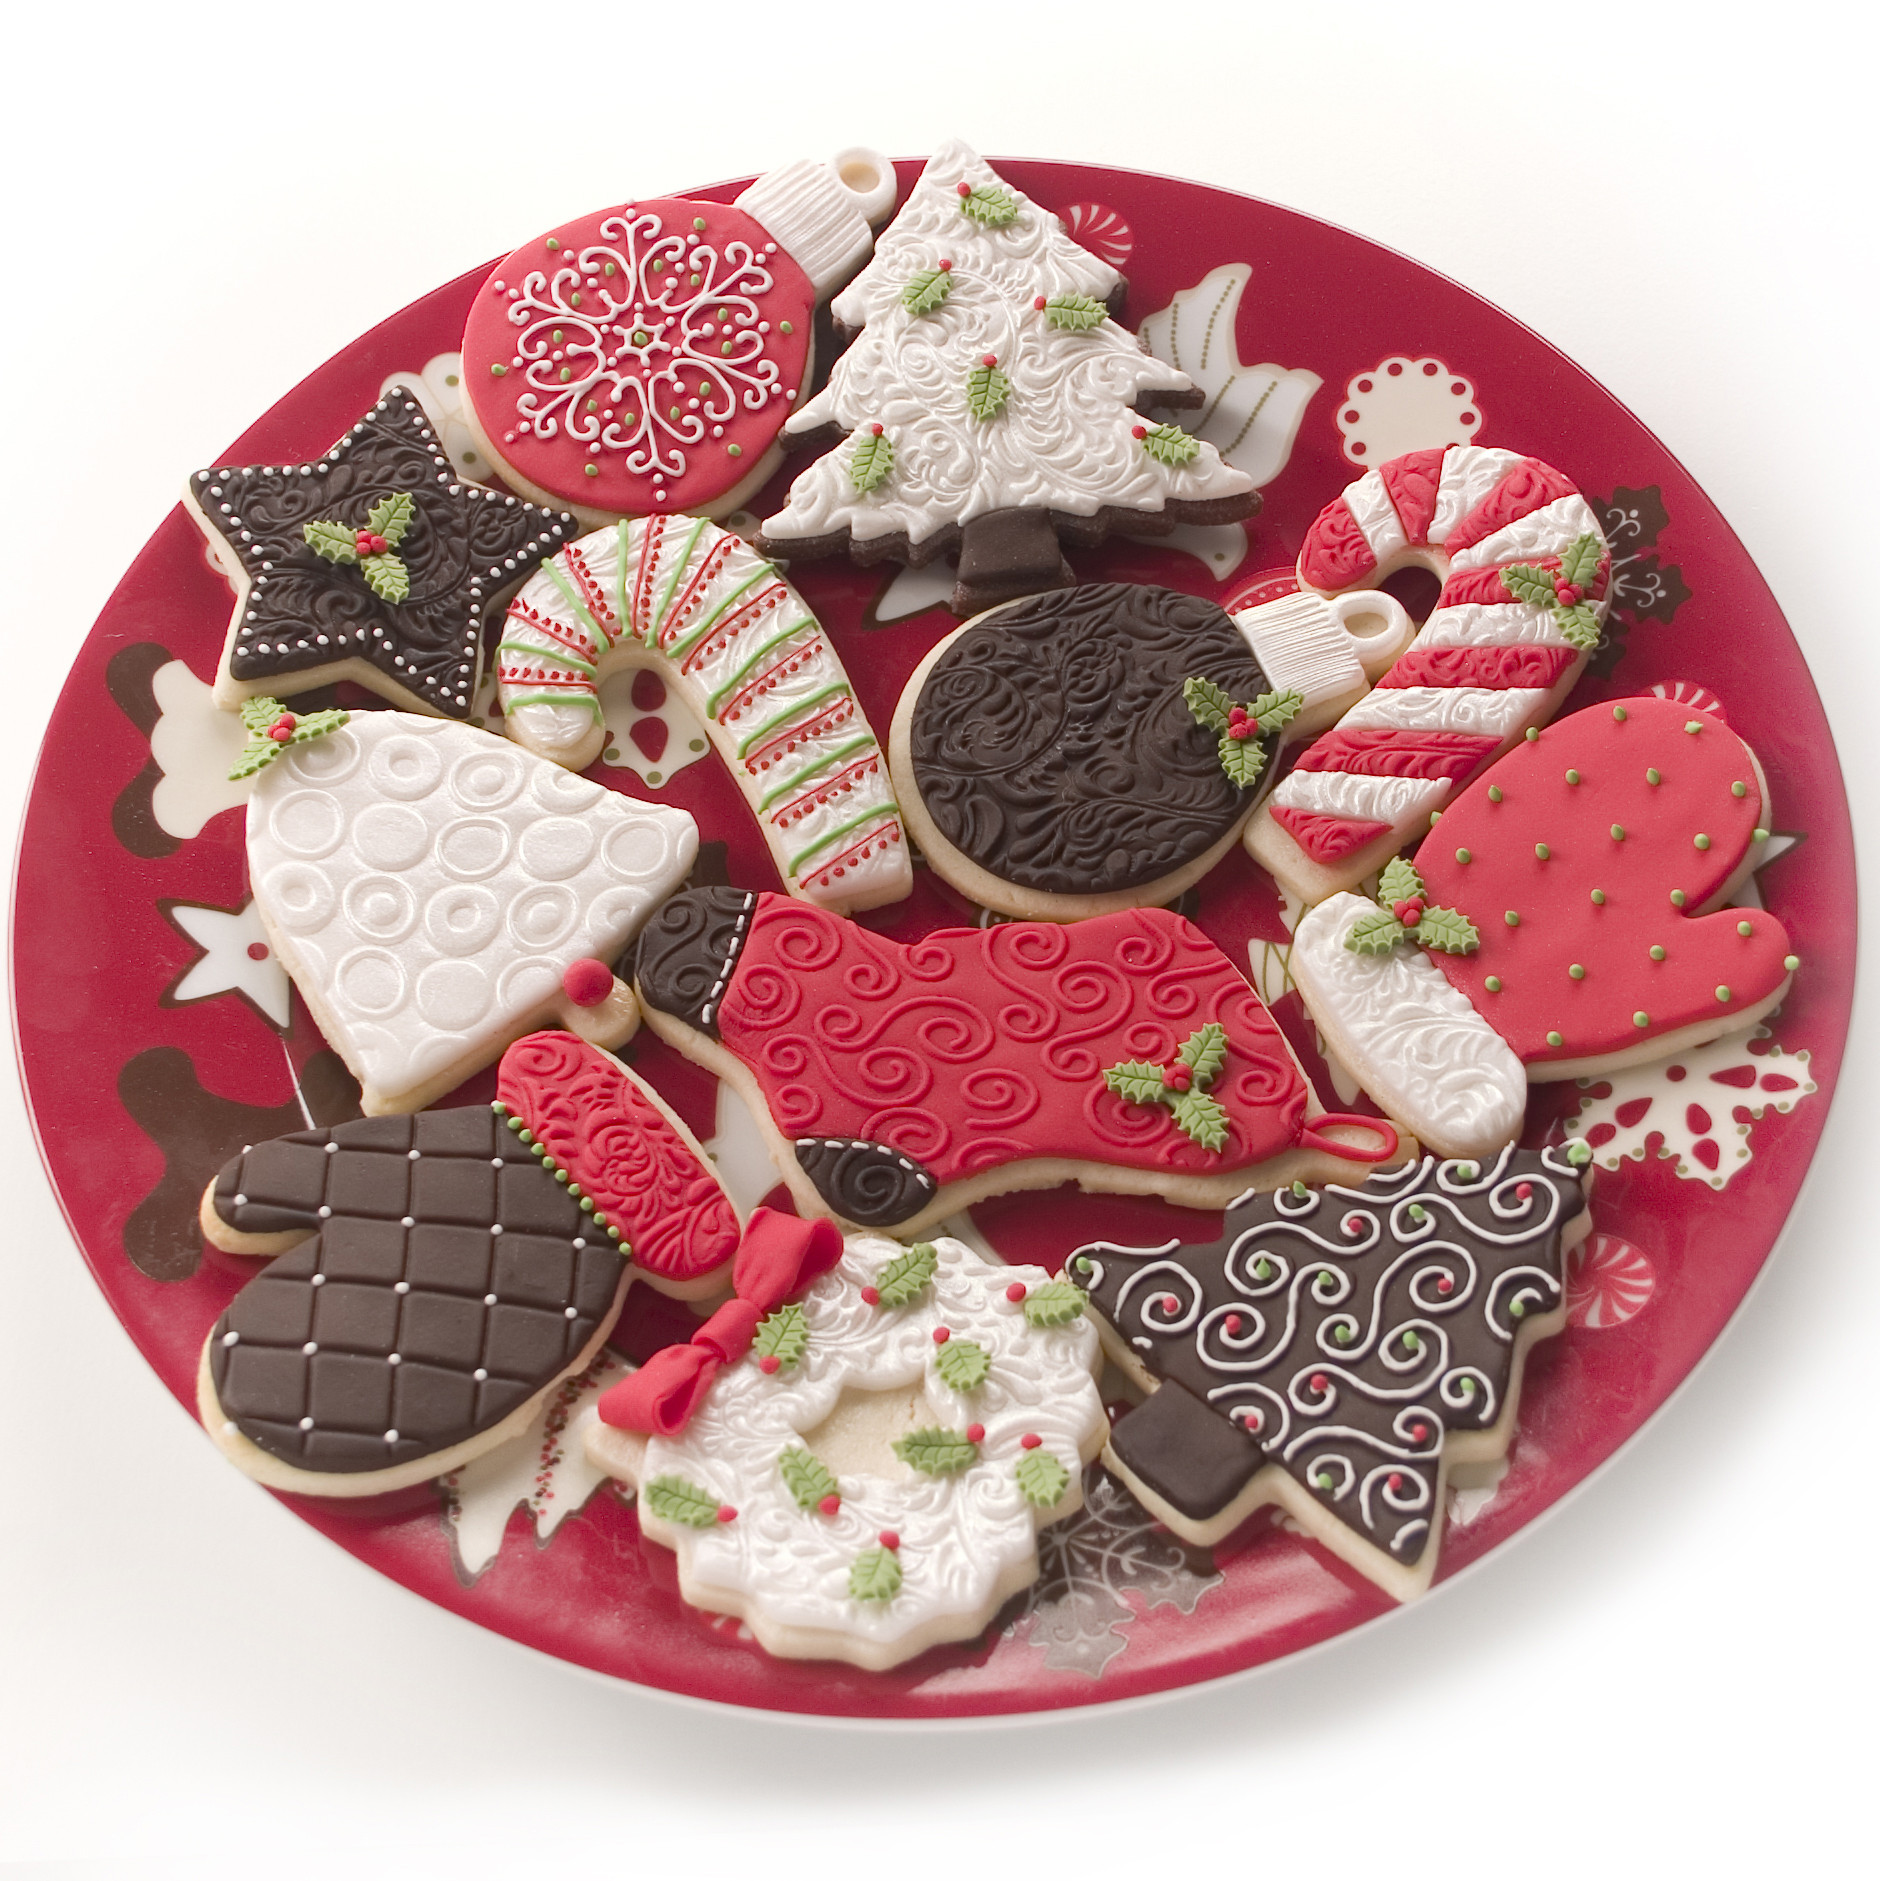 Decorated Christmas Cookies
 Holiday cookies